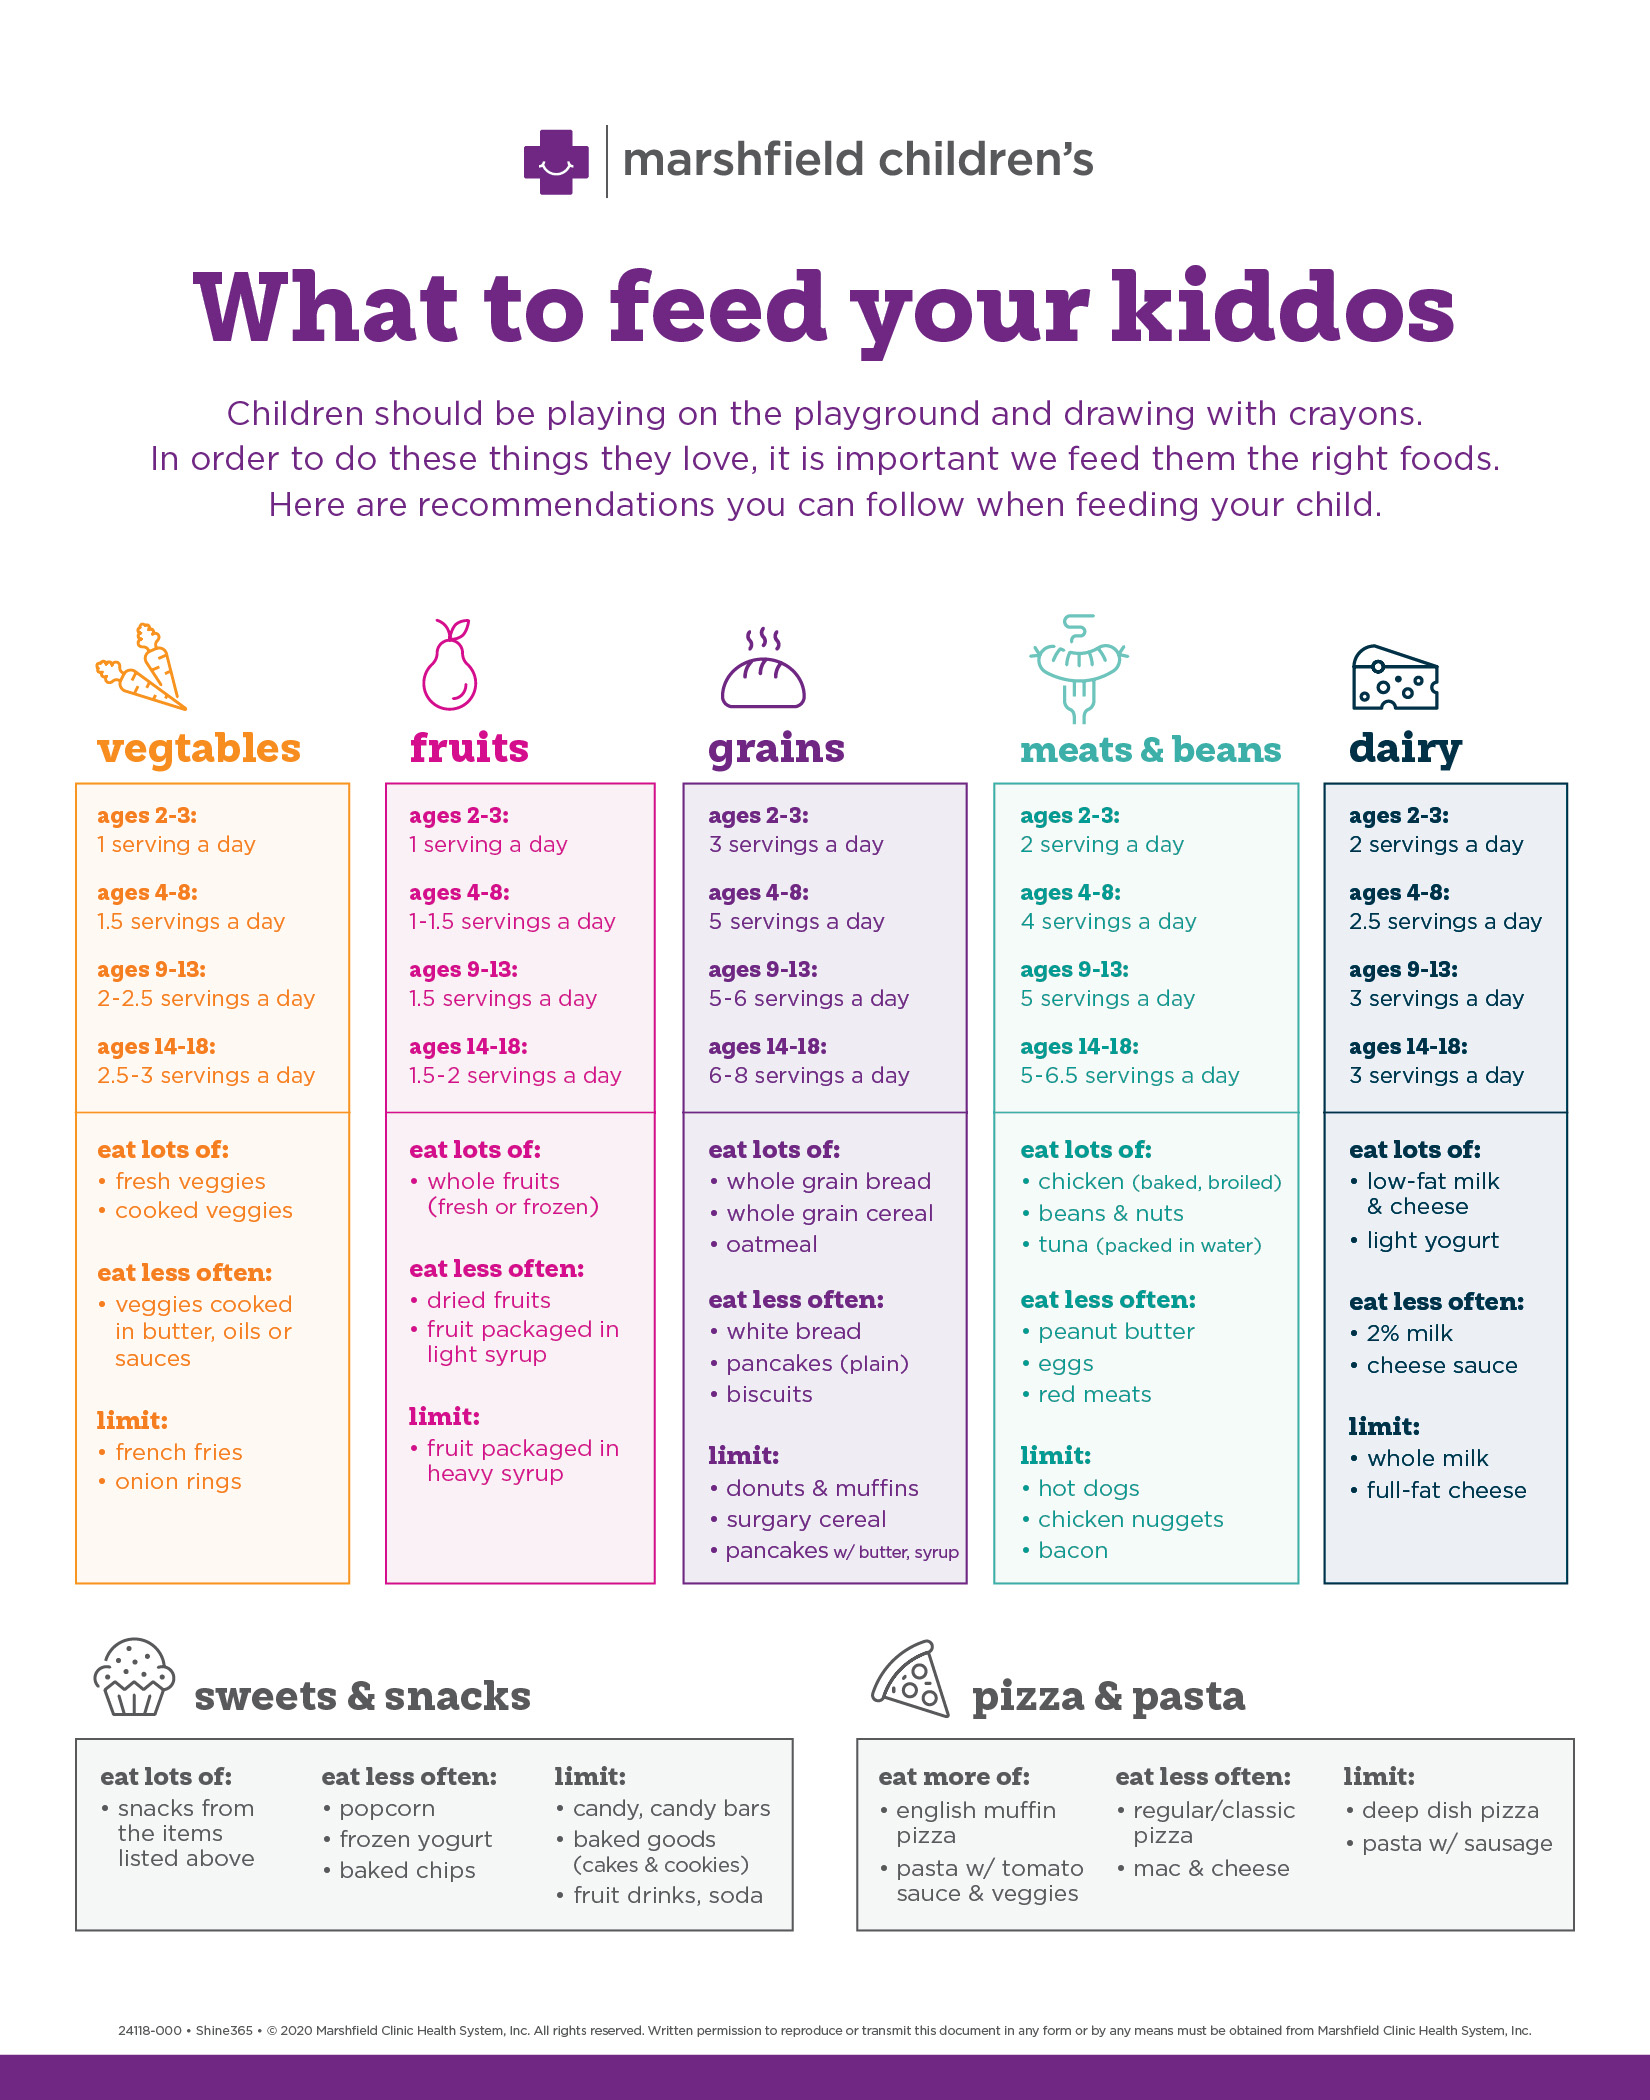 What to Feed Your Kids infographic